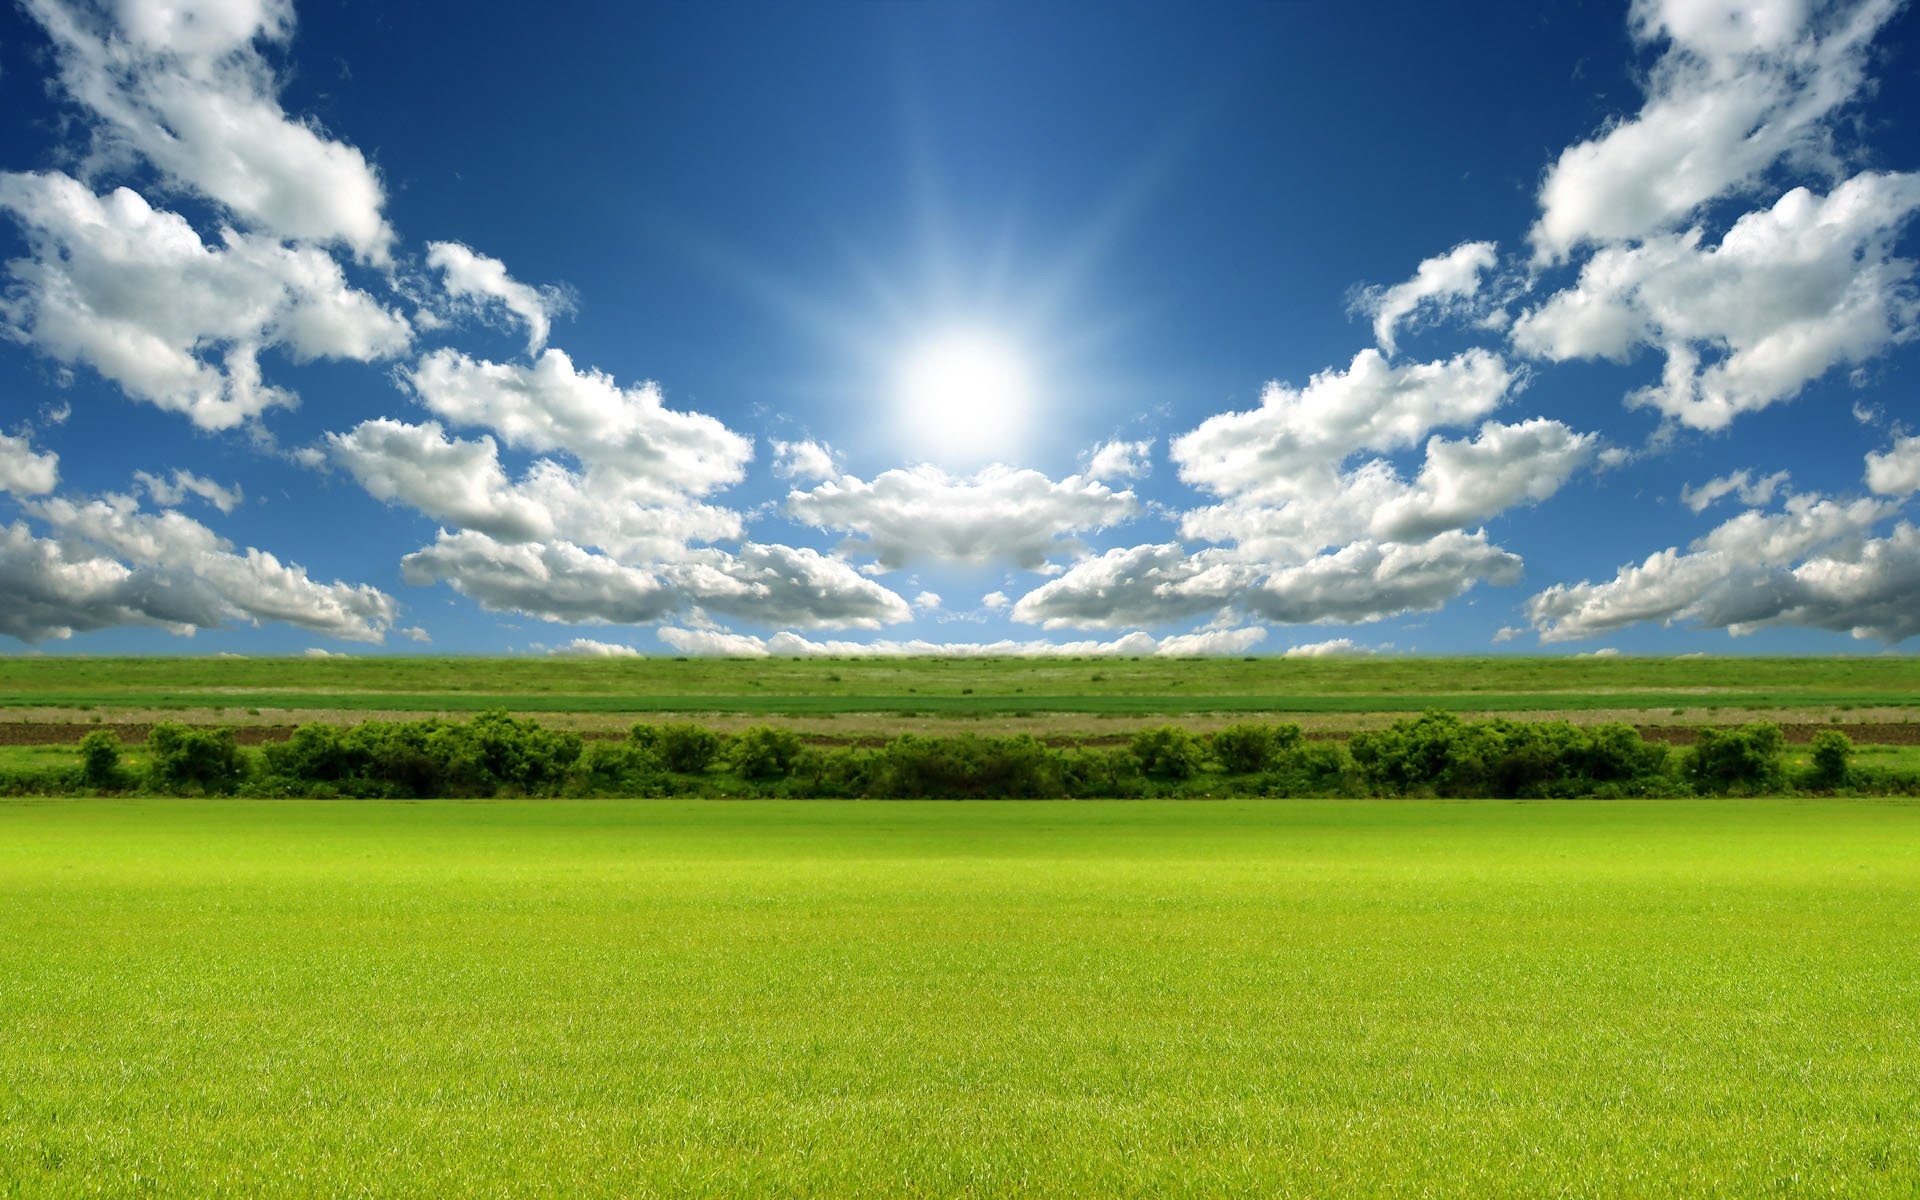 Sunny Day Background 38 Images